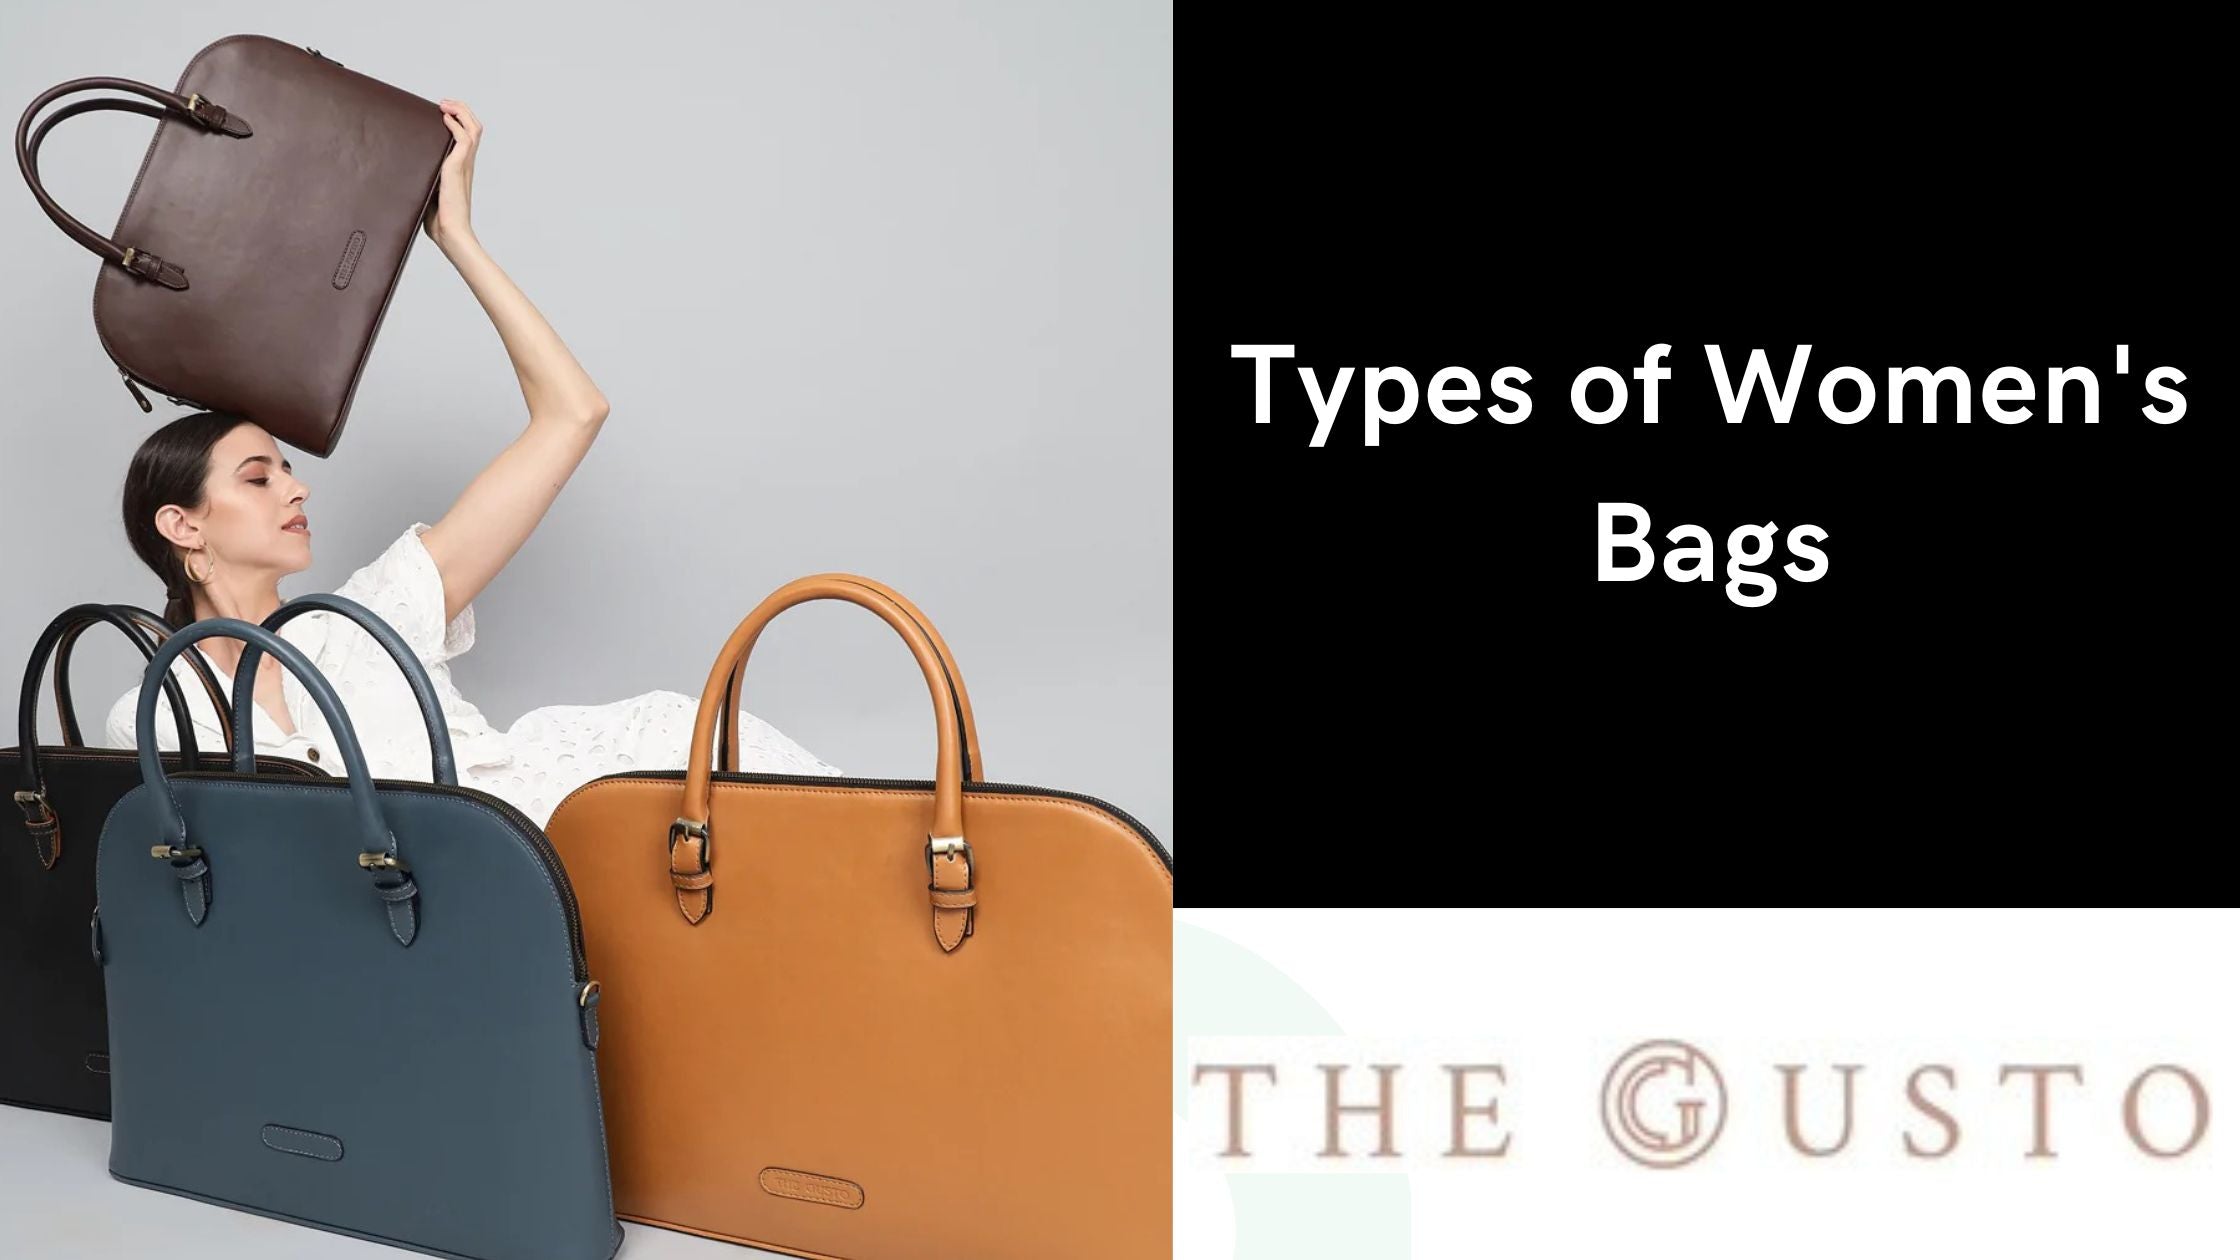 Types of Women's Bags – The Gusto